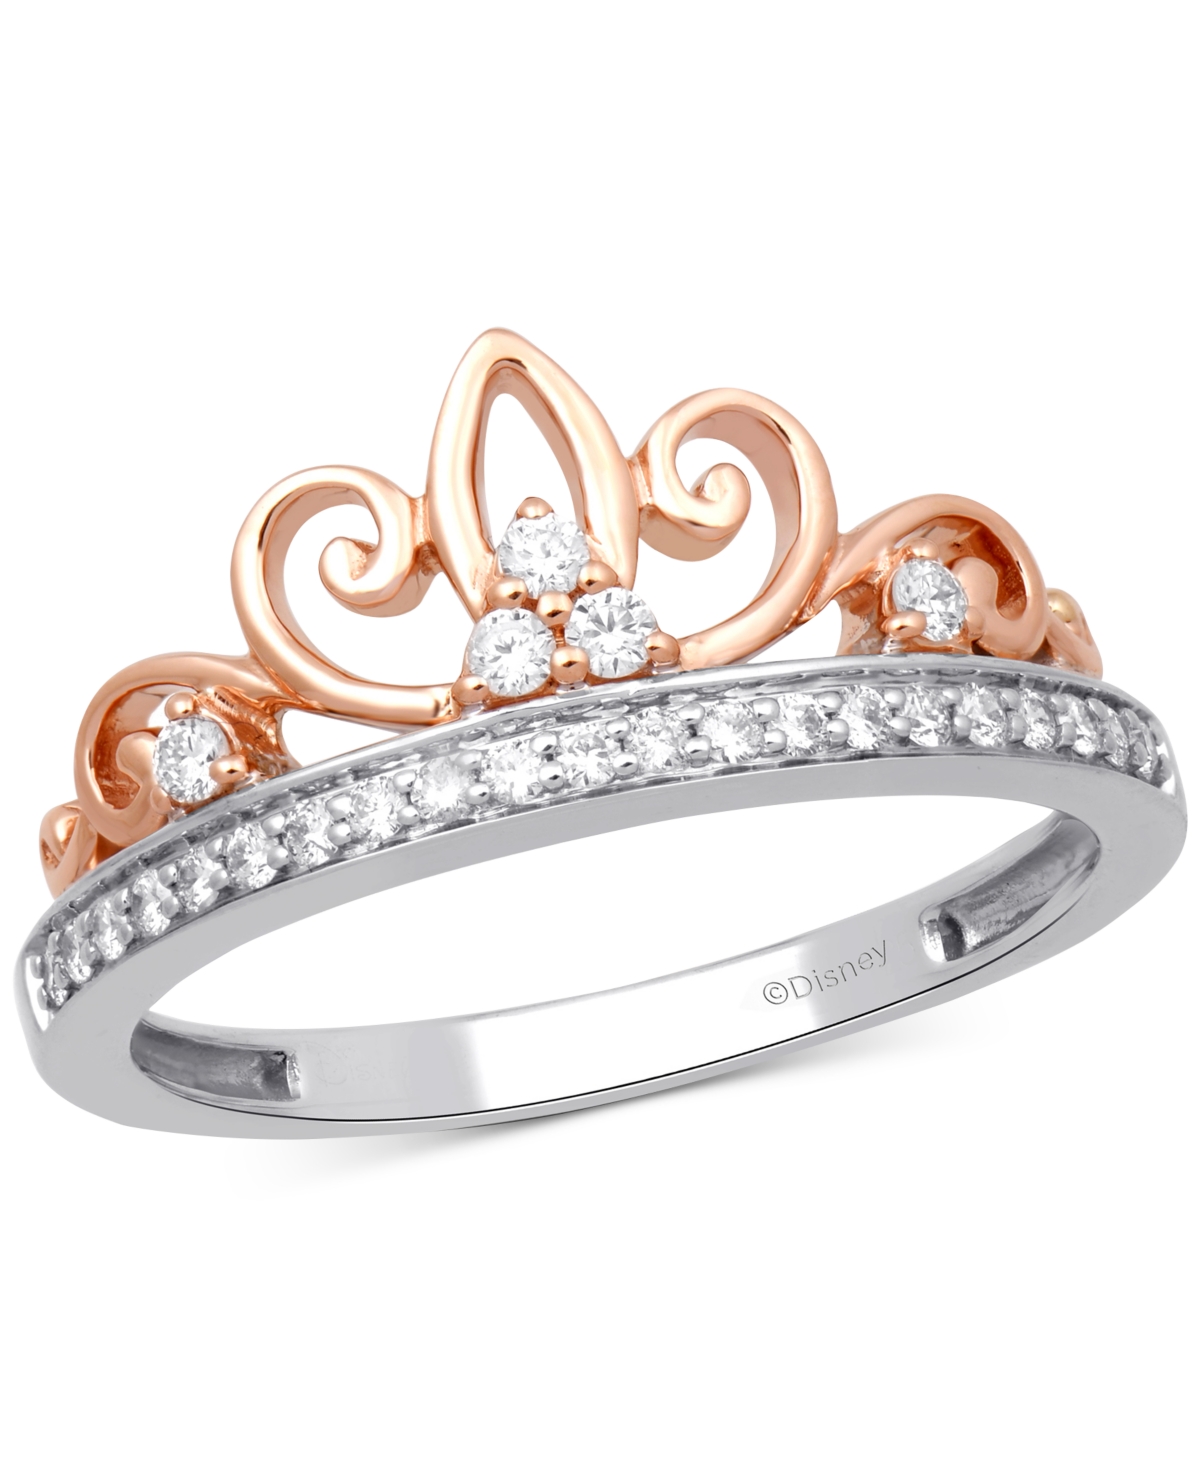 Diamond Majestic Tiara Ring (1/5 ct. t.w.) in Sterling Silver & 10k Rose Gold - Two-Tone